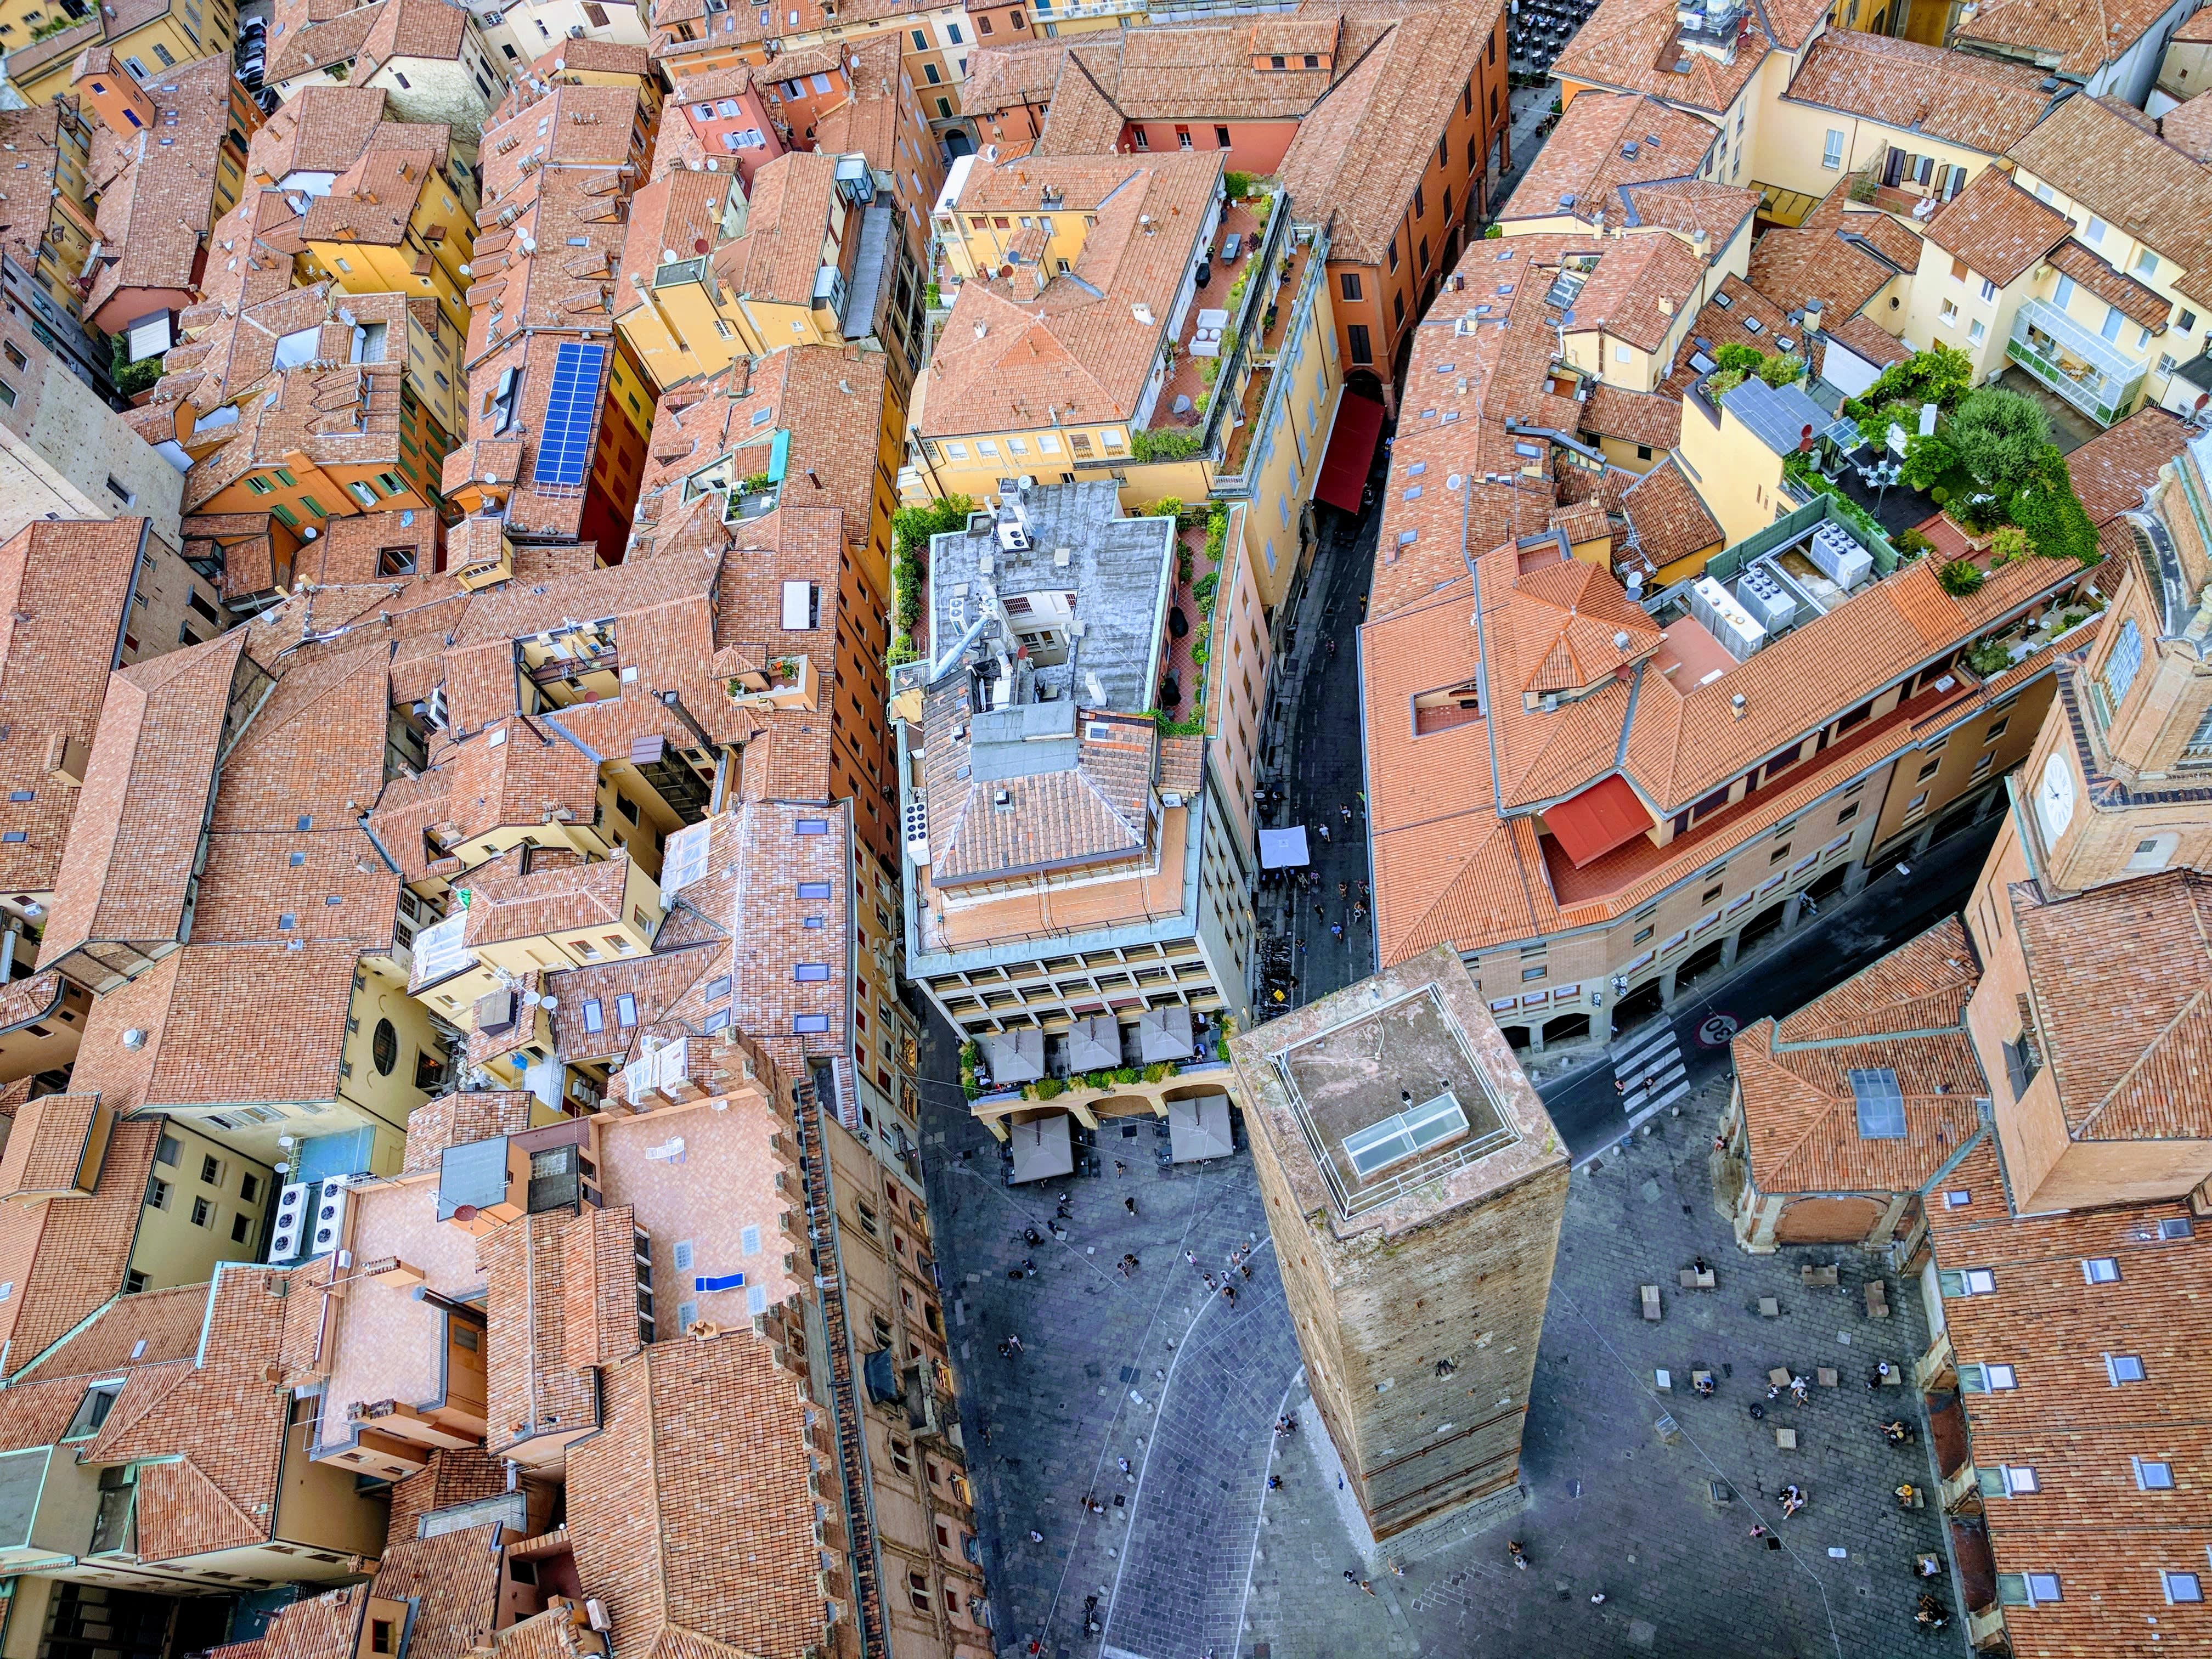 A junction in Bologna as seen from a birds-eye view